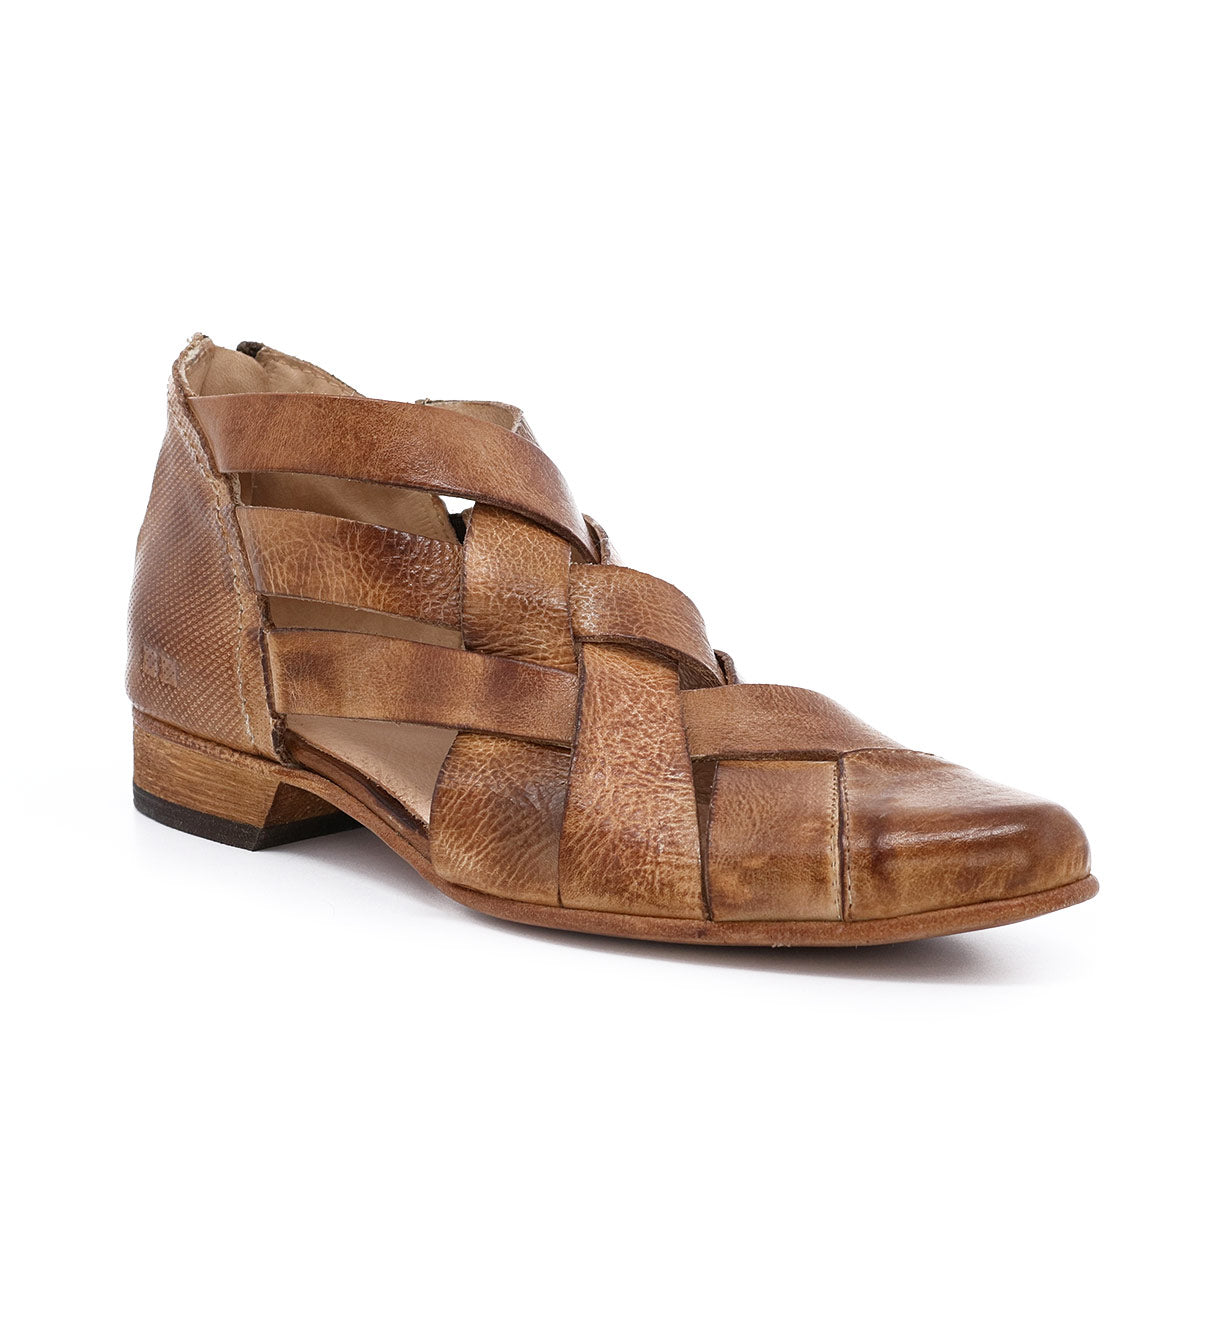 A pair of Bed Stu women's brown leather shoes named Brittany.